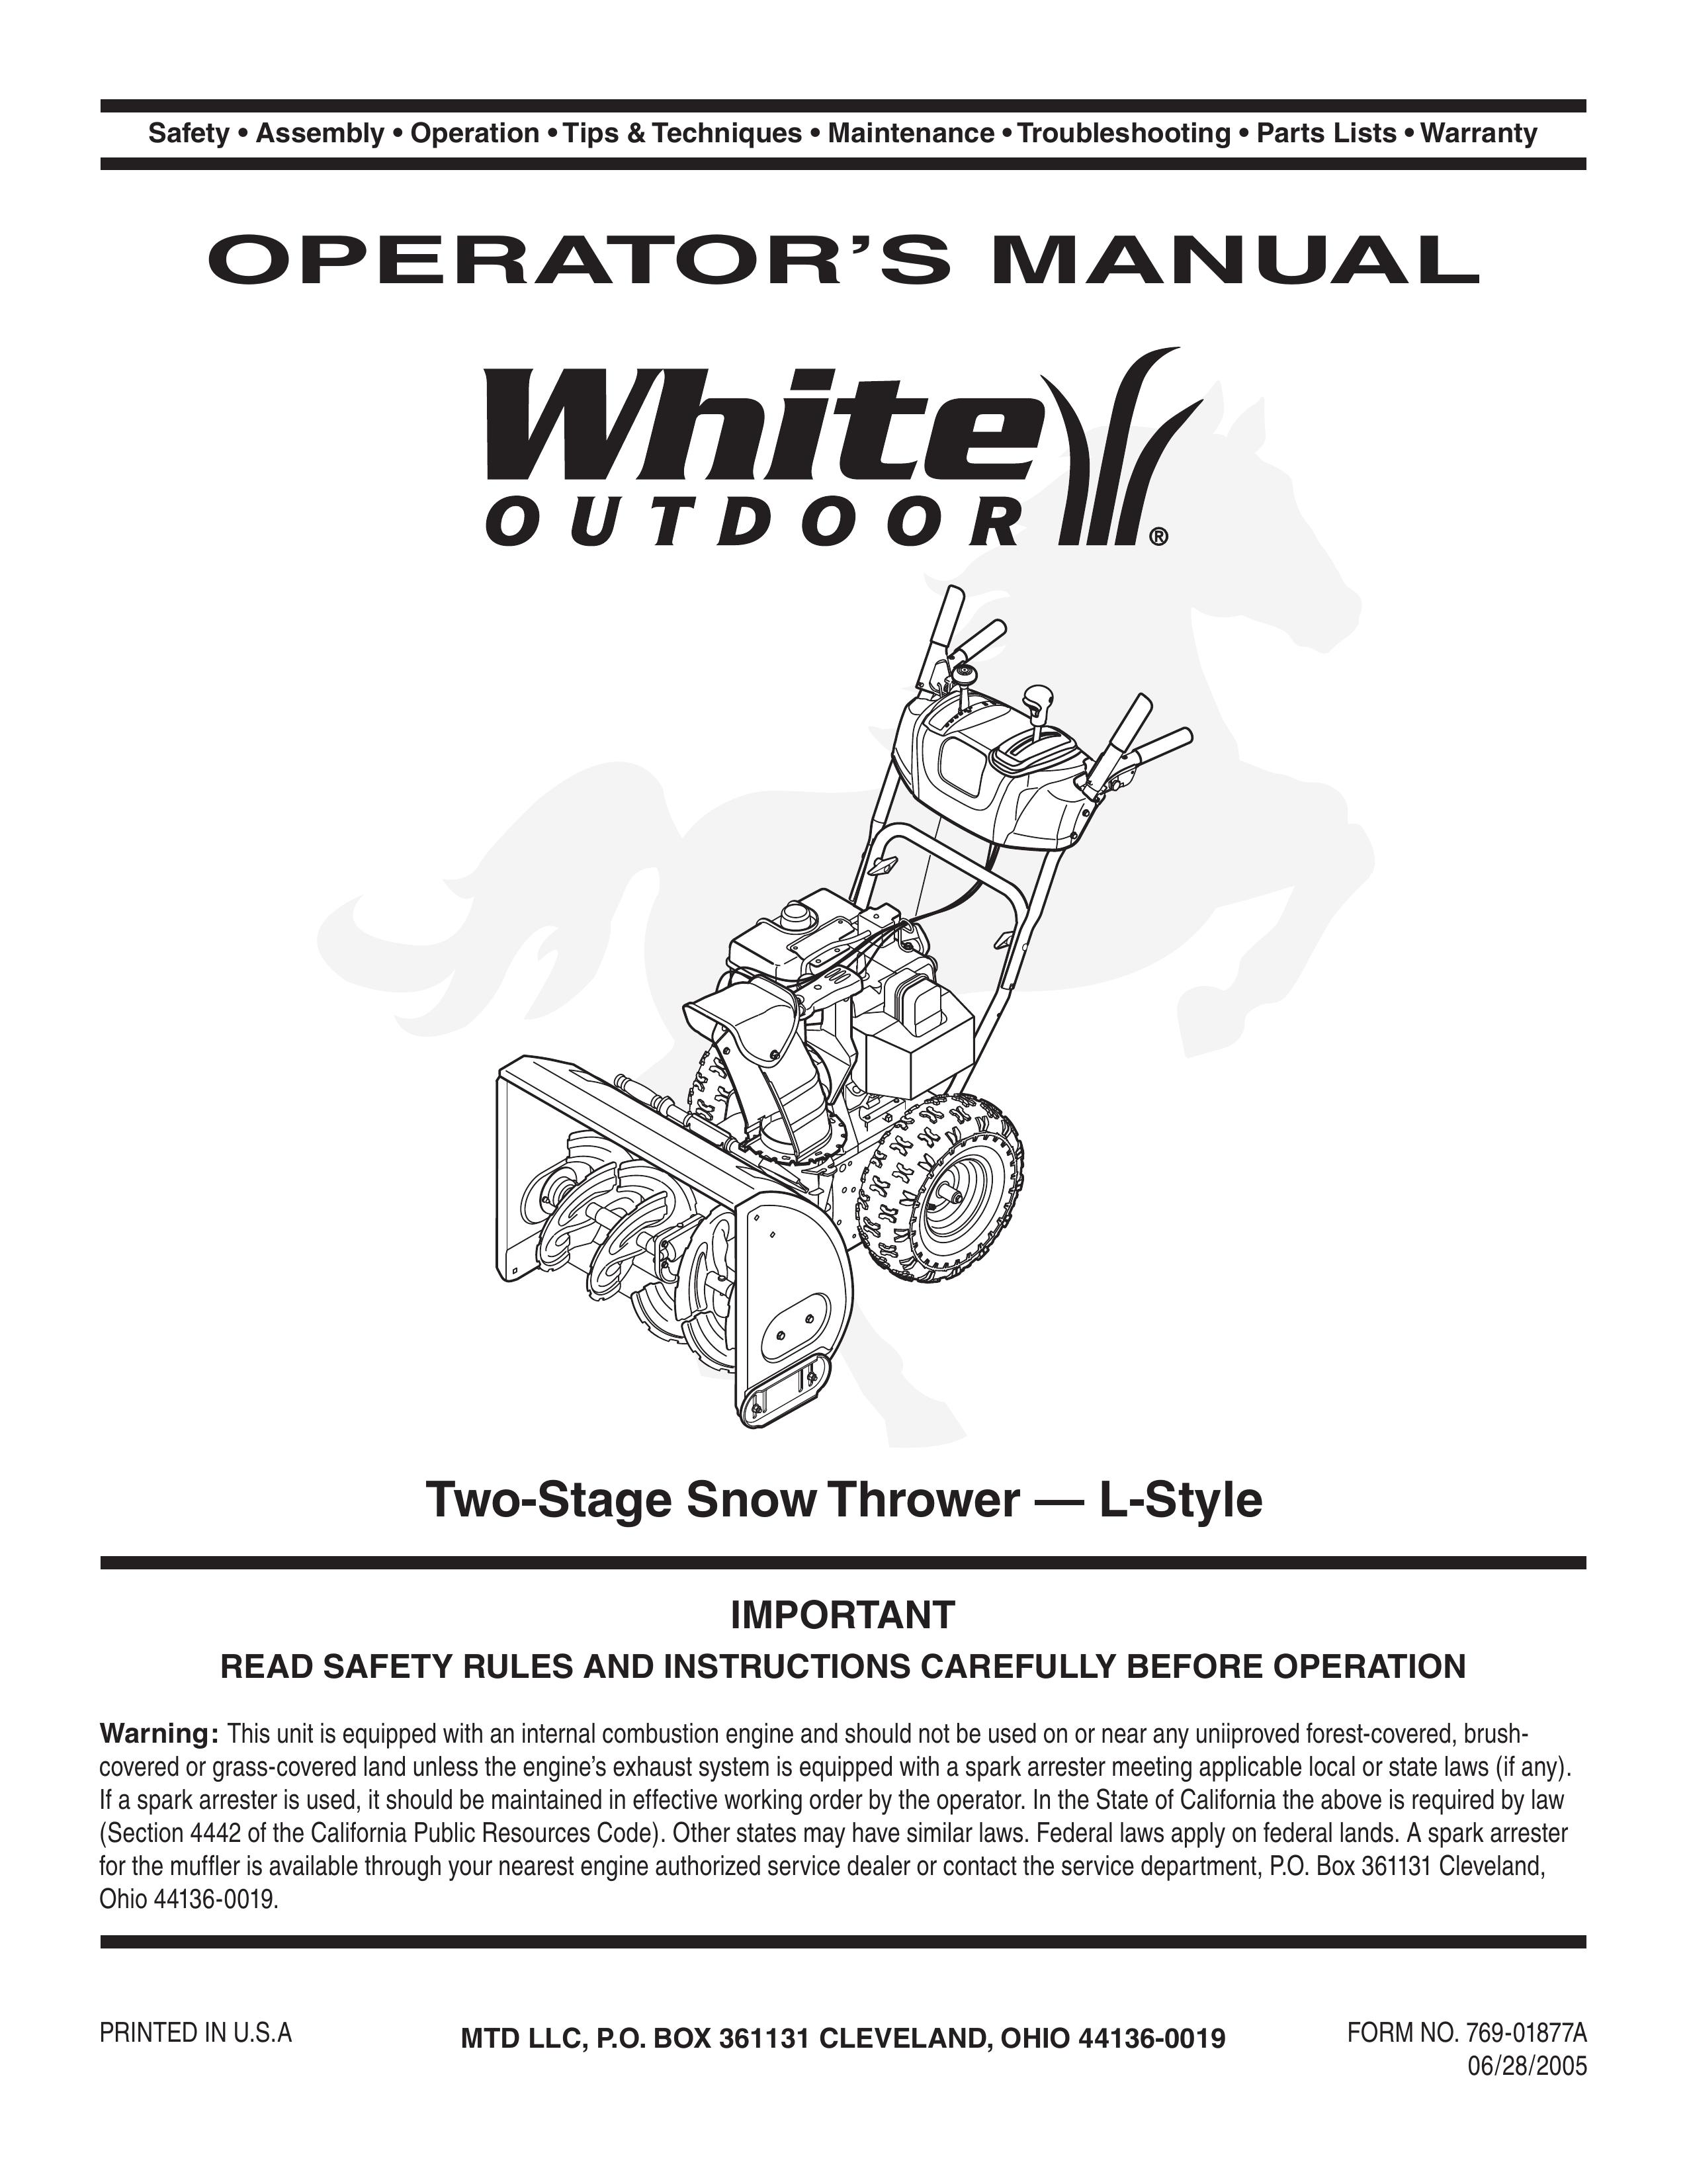 White Outdoor L-Syle Snow Blower User Manual